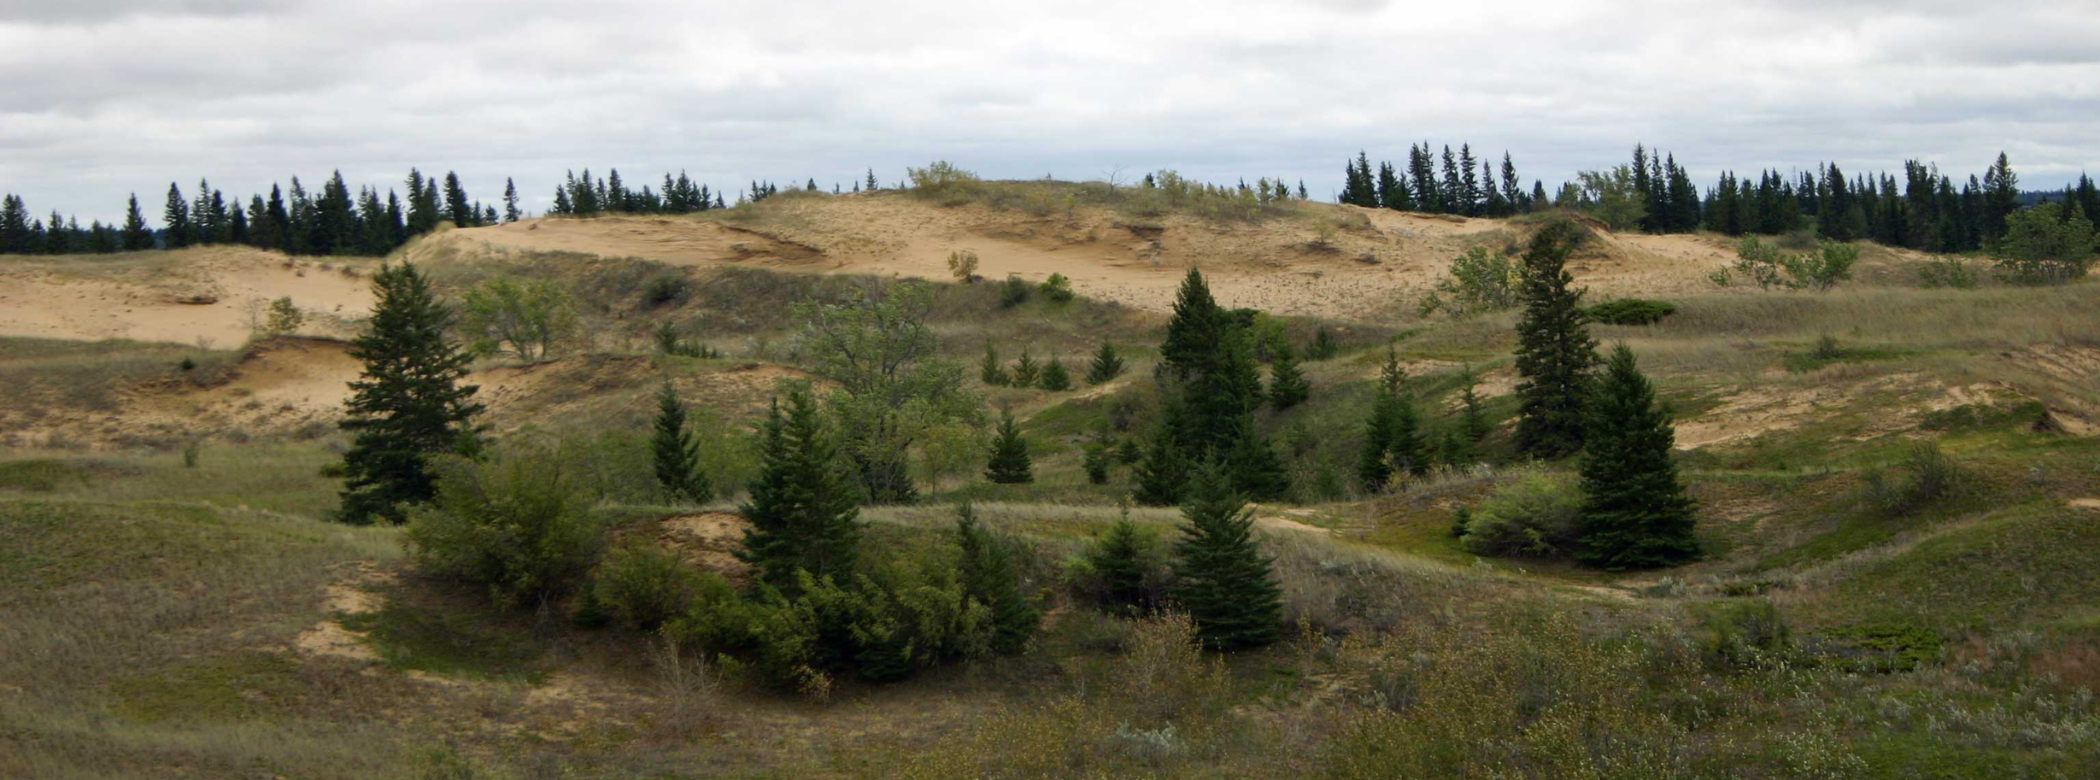 Gently rolling dunes with sparse green grass growing on them along with small bushes and evergreen trees. In the distance are sandy dunes, lined by more evergreens.